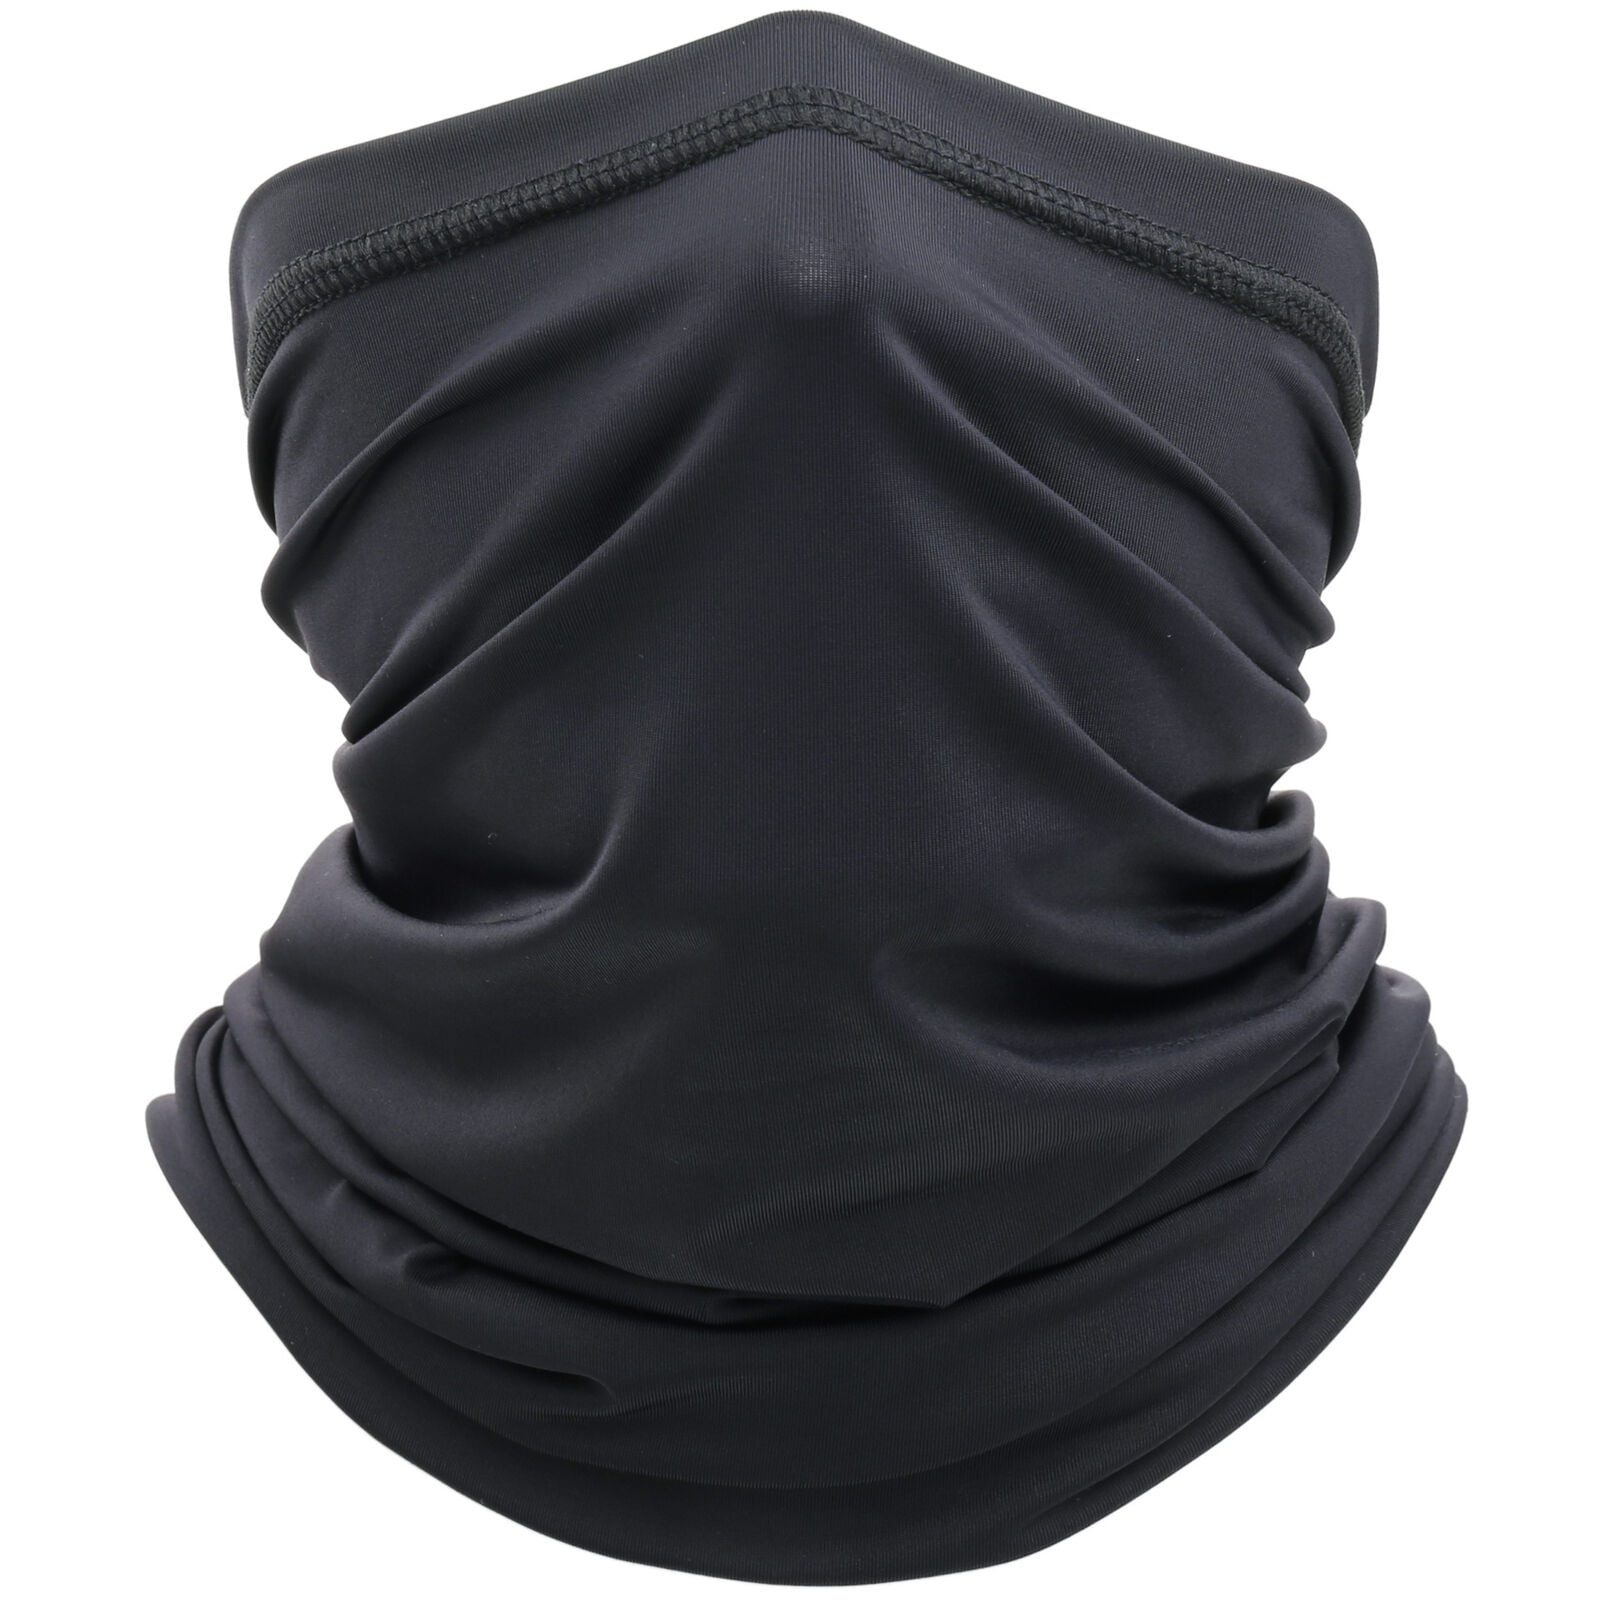 Cooling Neck Gaiter Tube Scarf Face Mask for Motorcycle Cycling Hunting Bandana 